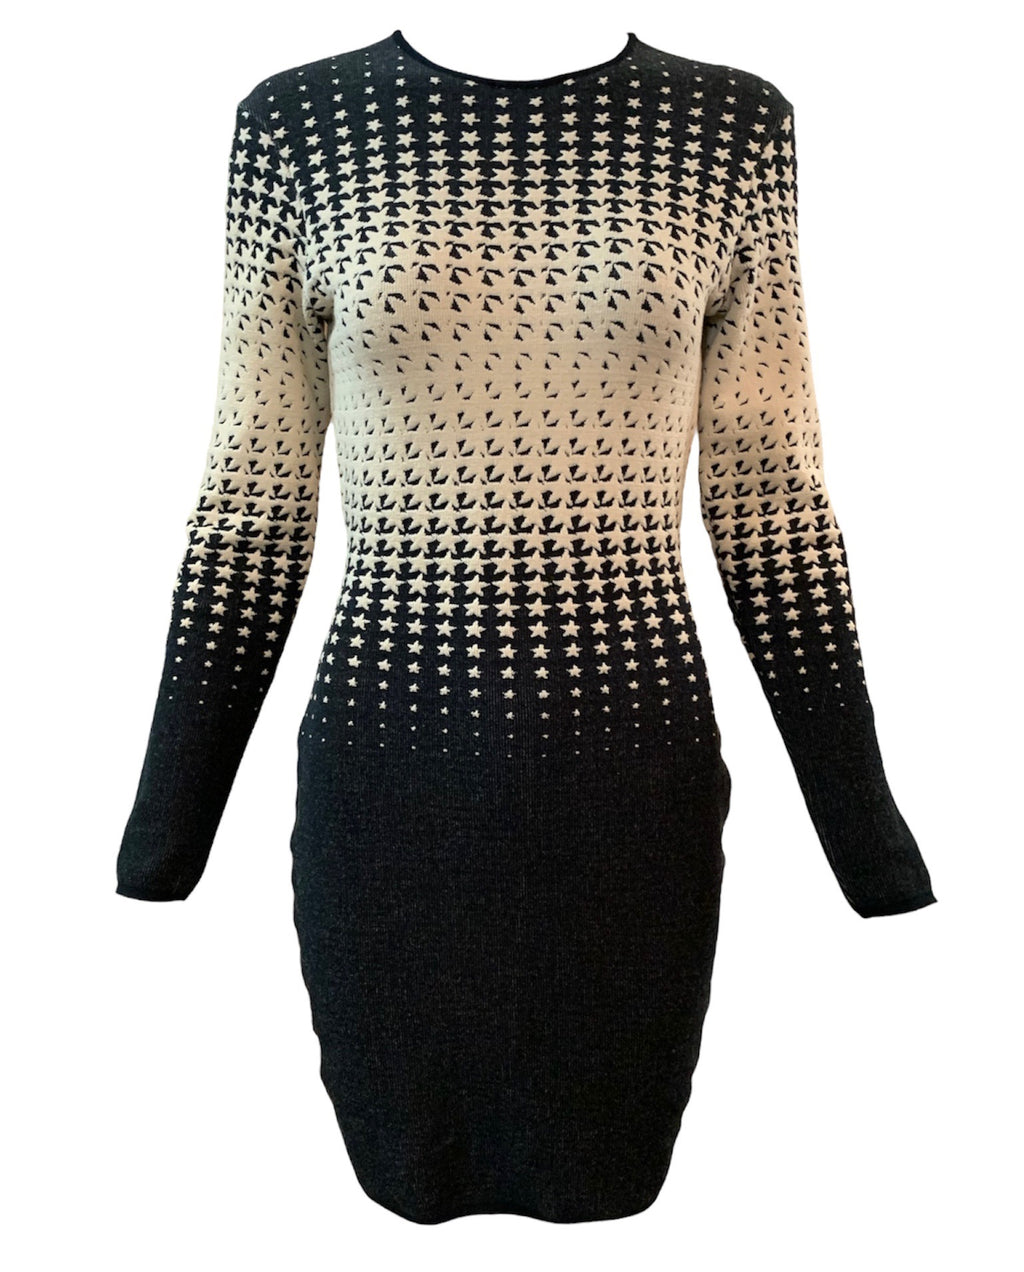  Thierry Mugler 90s Black and White Body Op Art Body Con Knit Dress FRONT 1 of 5